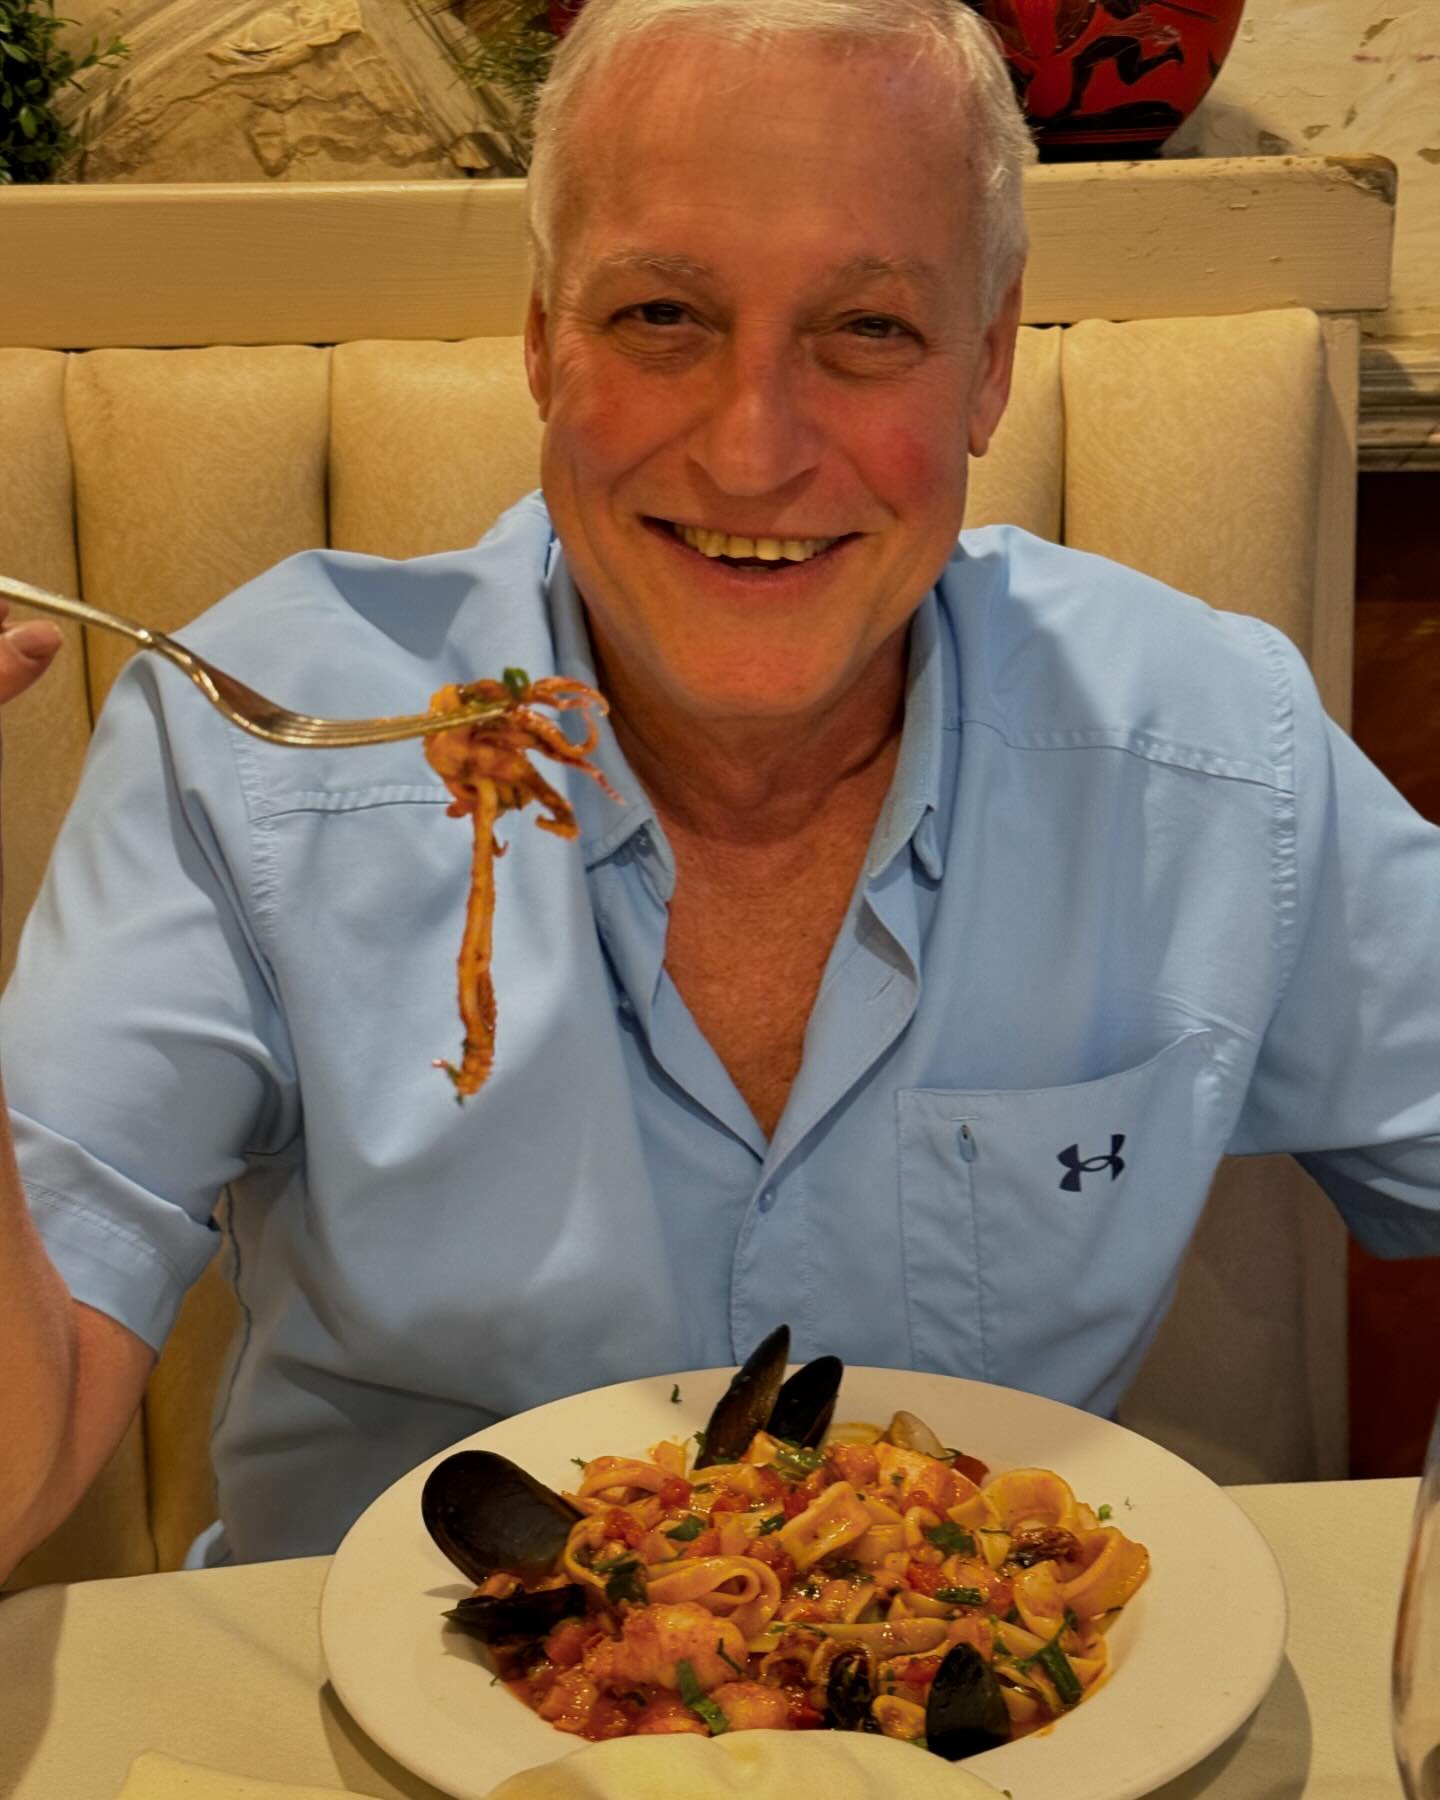 Yesterday we celebrated my favorite guy at his favorite restaurant @lucianositalianrestaurant with his favorite meal #fruittidimare.  Happy Birthday Phil!  Cheers to many more!! XOXO